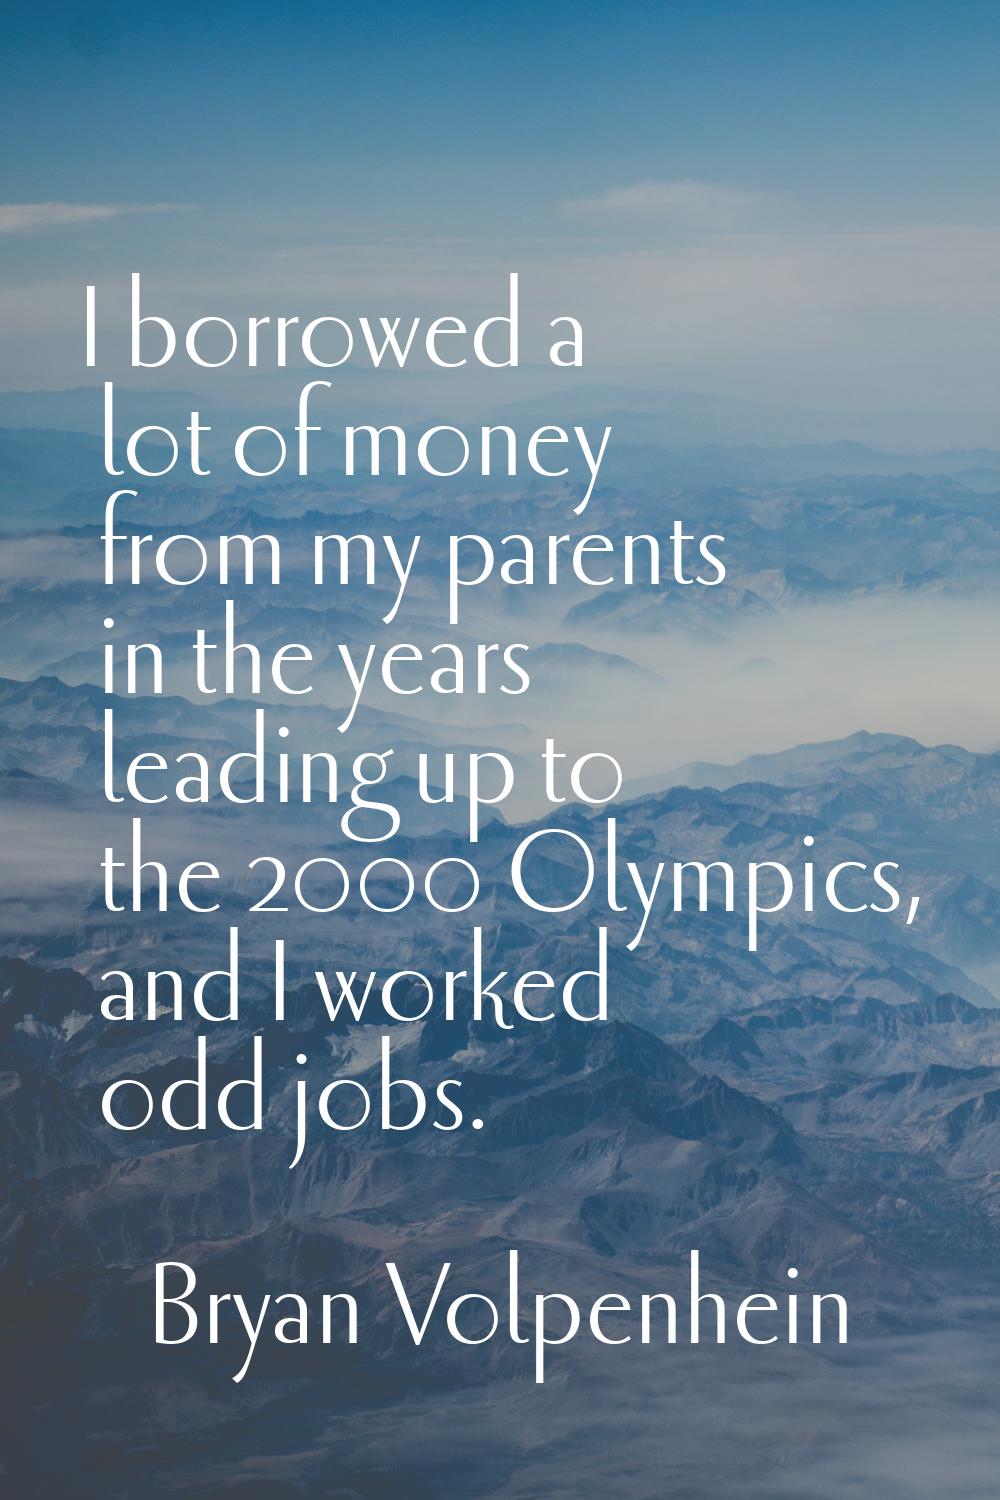 I borrowed a lot of money from my parents in the years leading up to the 2000 Olympics, and I worke